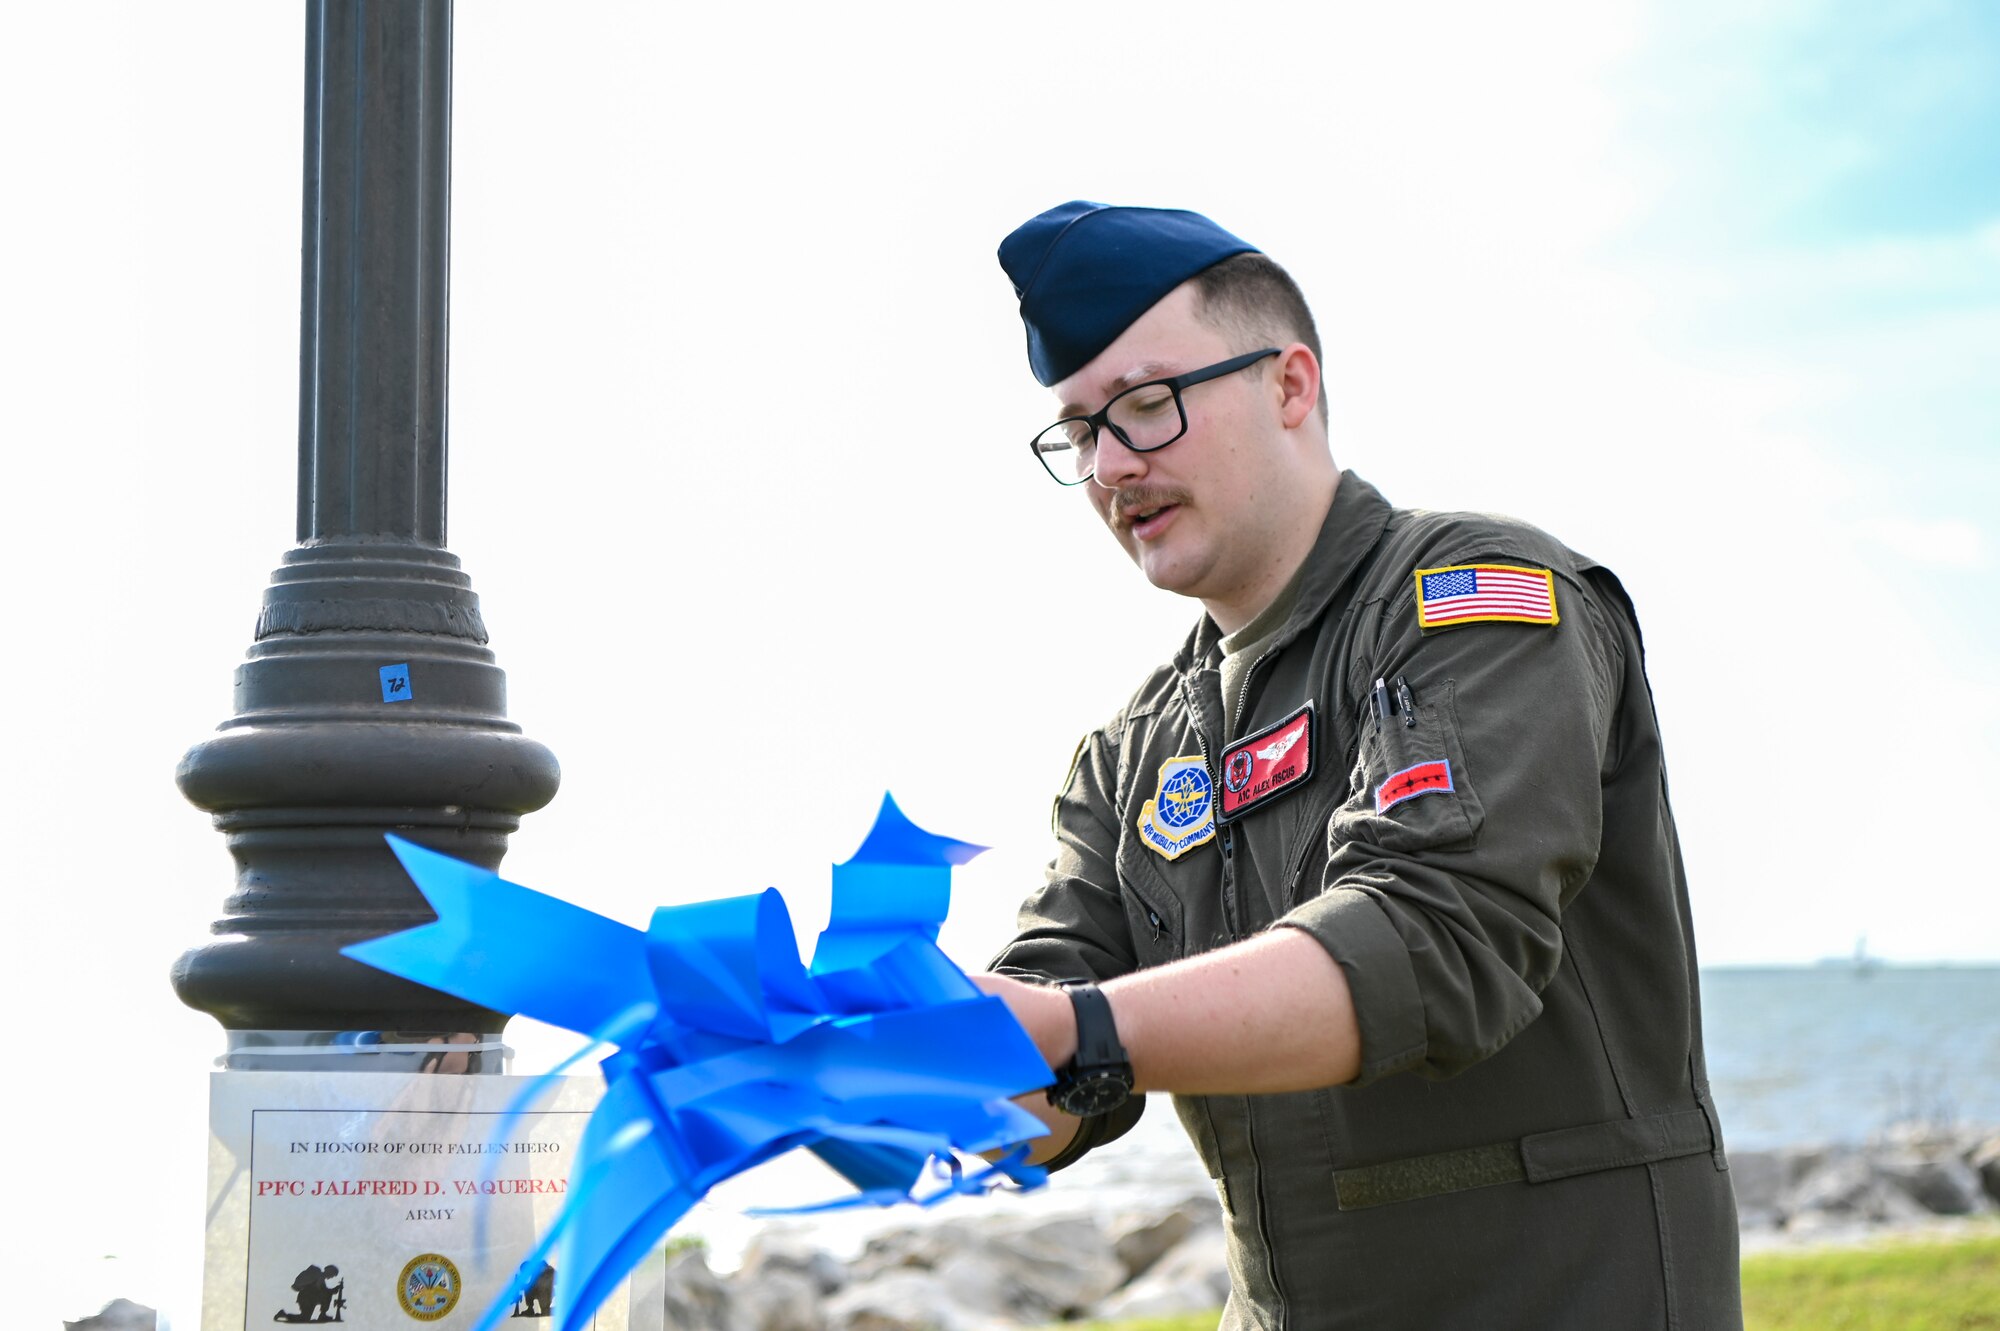 U.S. Air Force Airman 1st Class Alex Fiscus, a boom operator with the 50th Air Refueling Squadron, ties a bow during the Second Annual Memorial Day Remembrance event at MacDill Air Force Base, Florida, May 25, 2022.